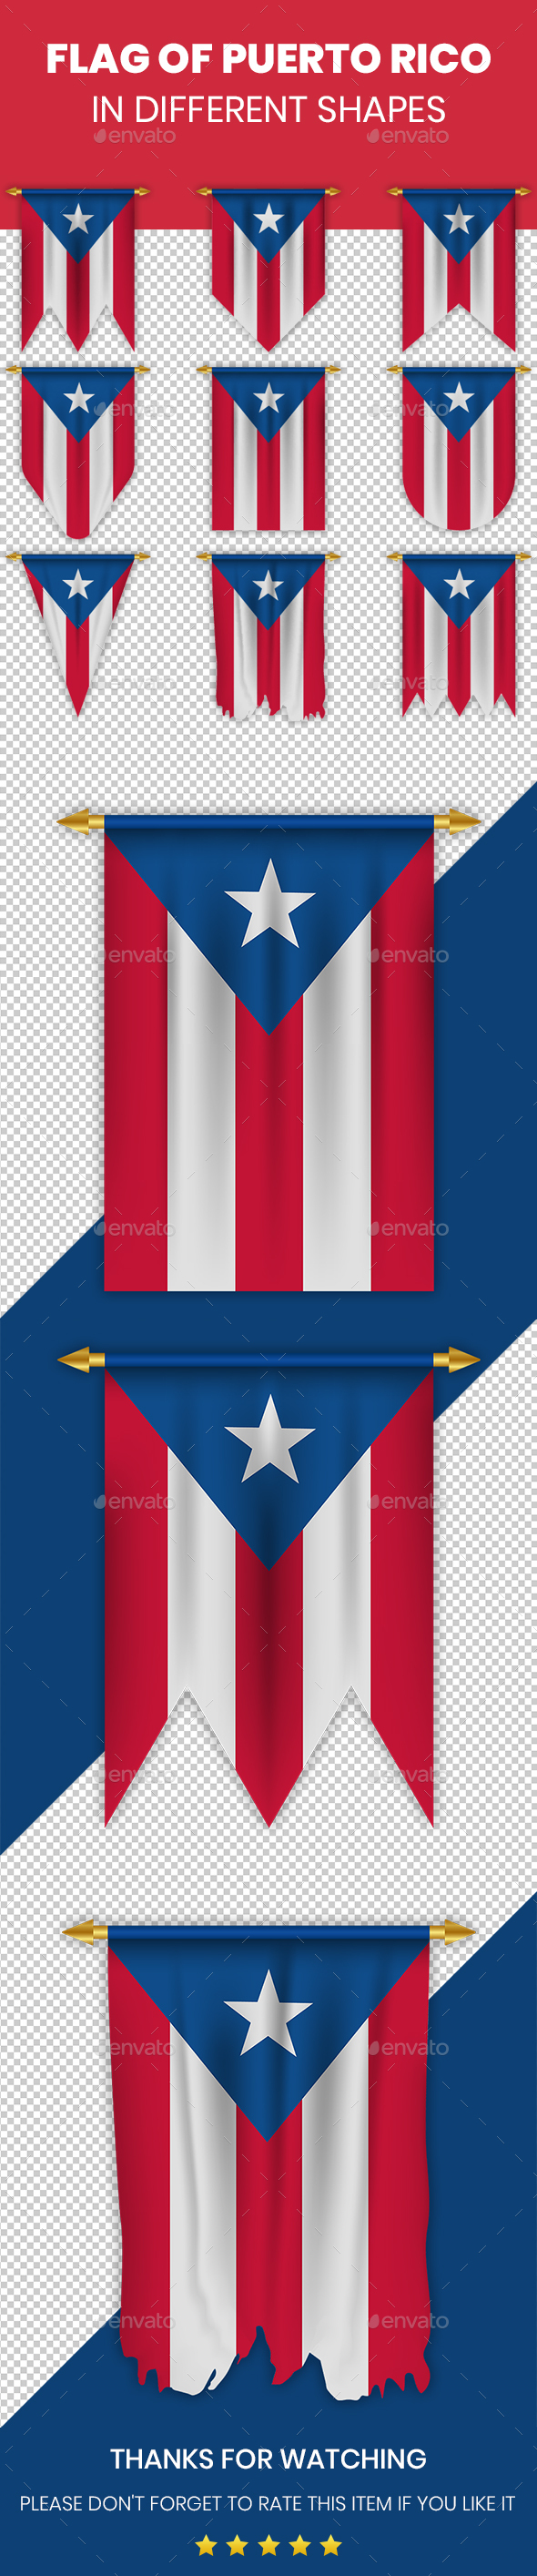 Puerto Rico Flag In Different Shapes